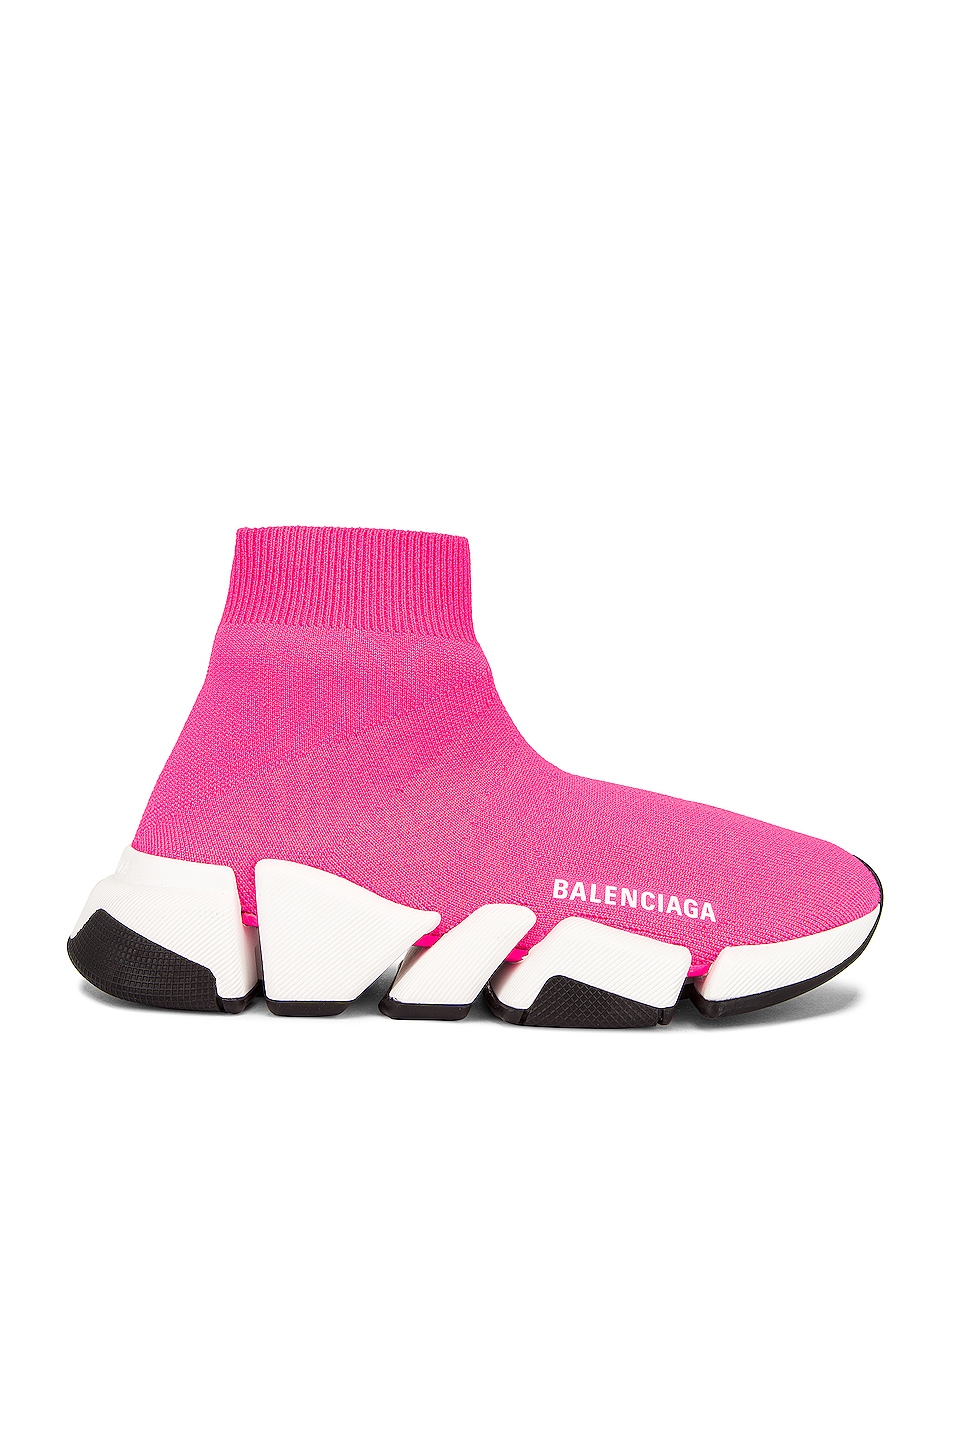 Image 1 of Balenciaga Speed 2.0 LT Sneakers in Fluo Pink & White & Black